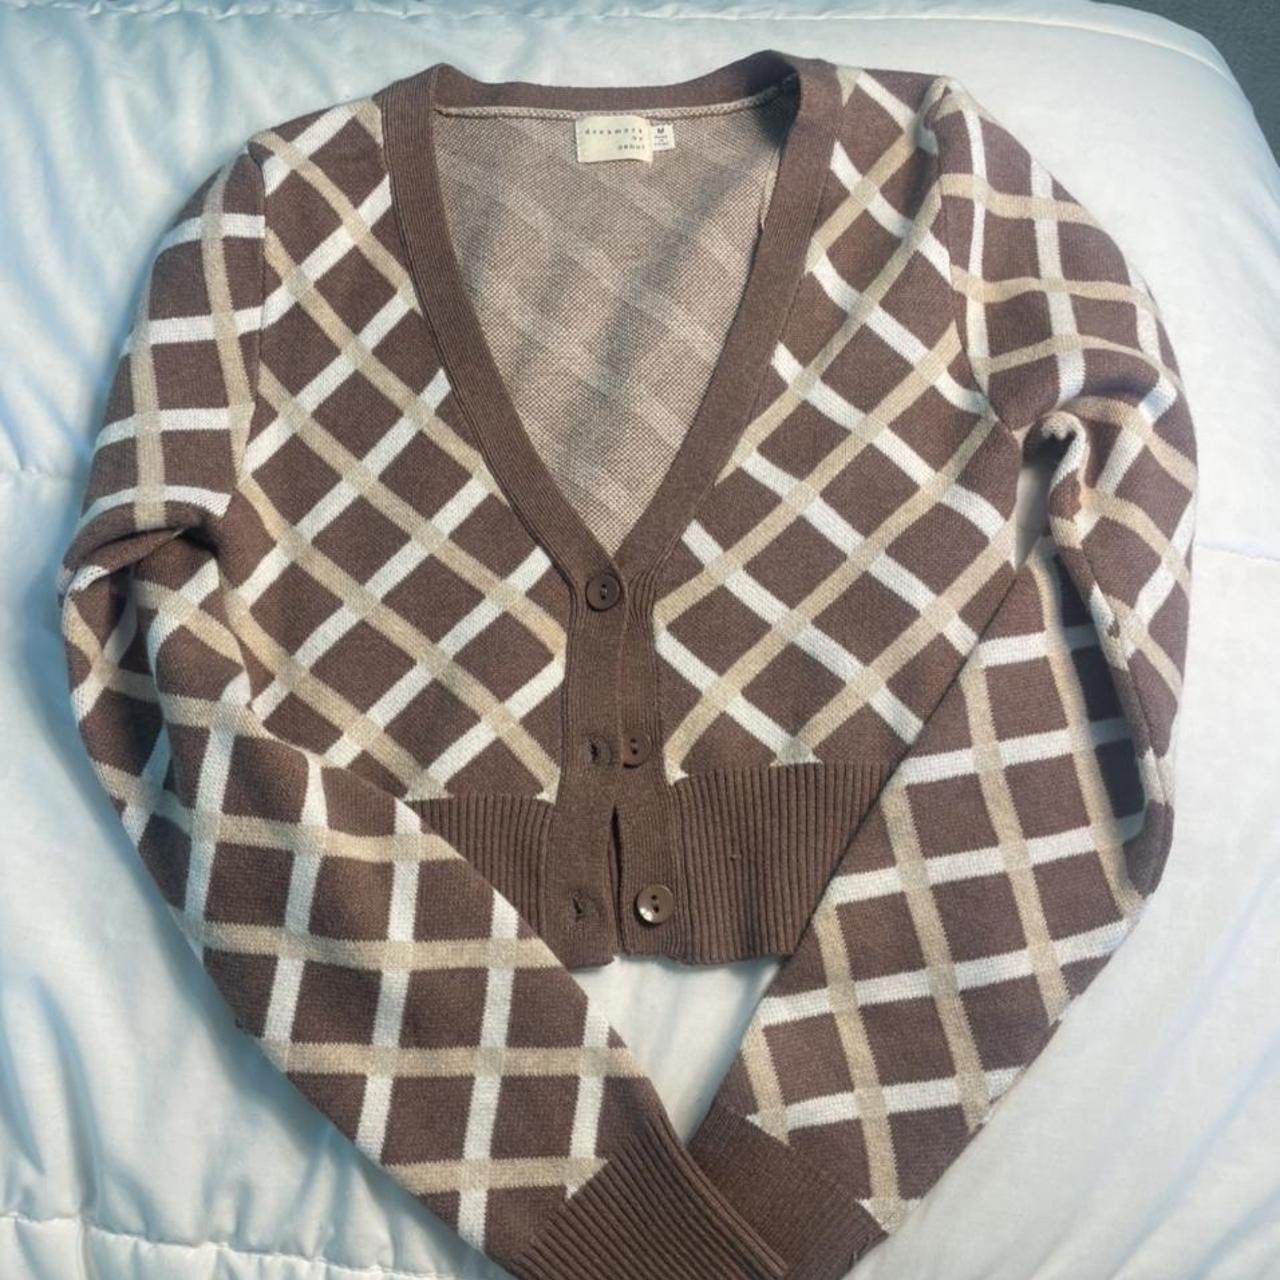 Product Image 2 - Super cute cardigan!
Brown with the